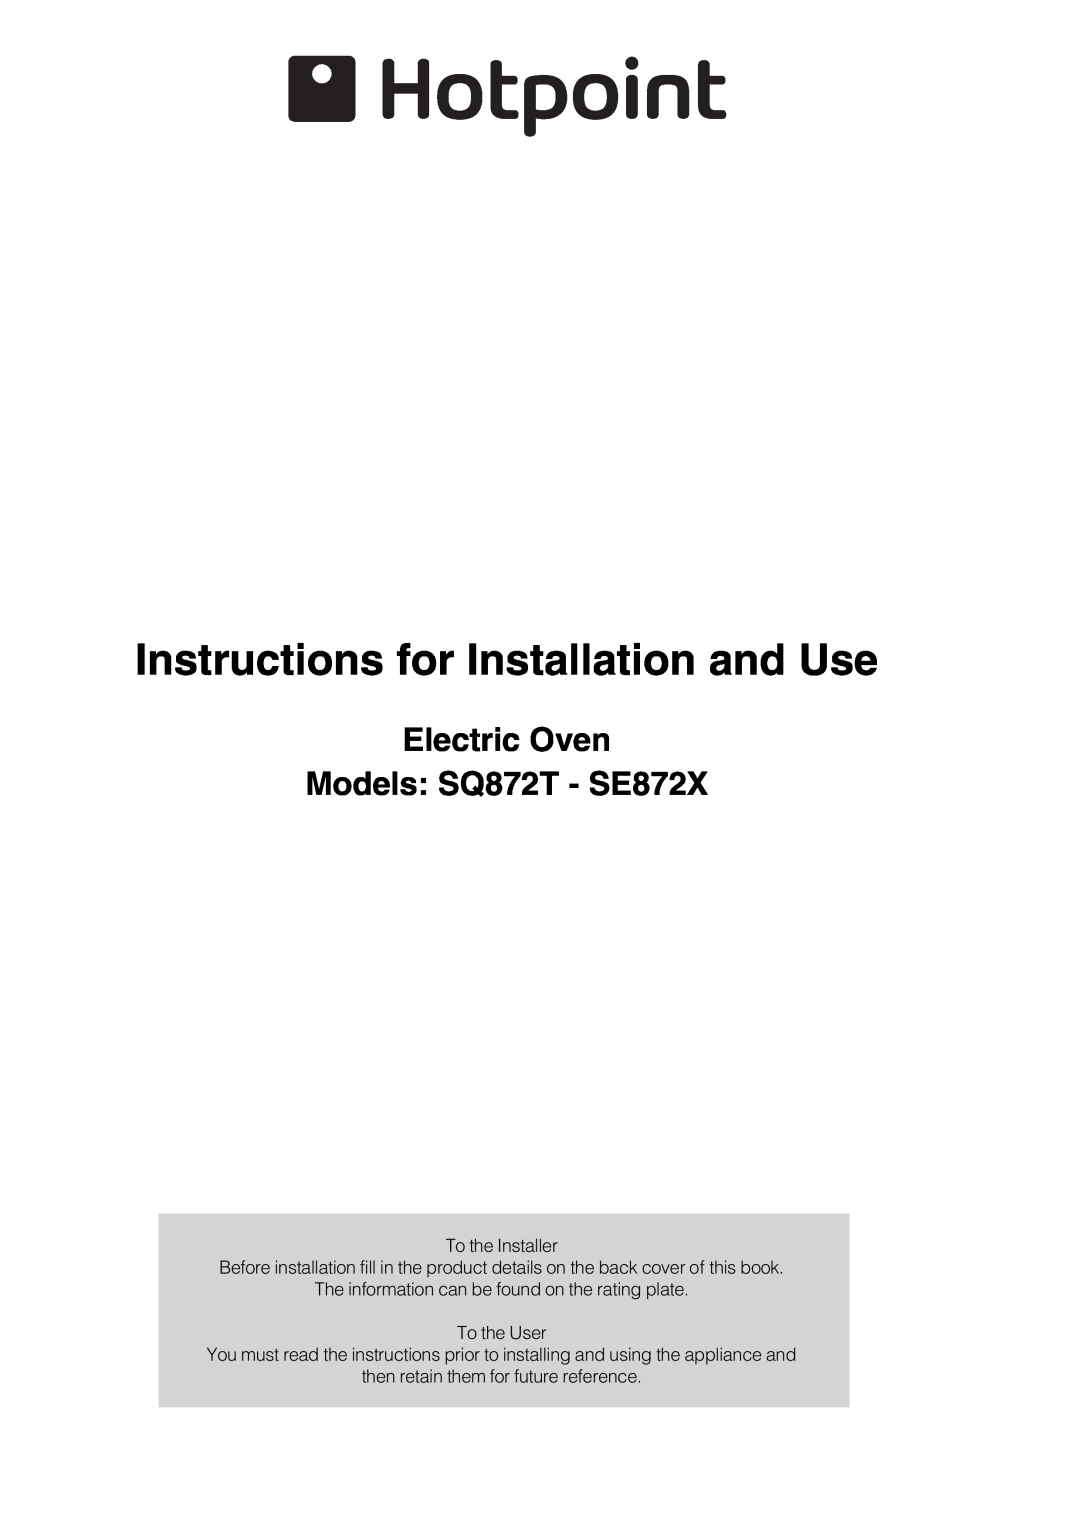 Hotpoint manual Instructions for Installation and Use, Electric Oven Models SQ872T - SE872X 